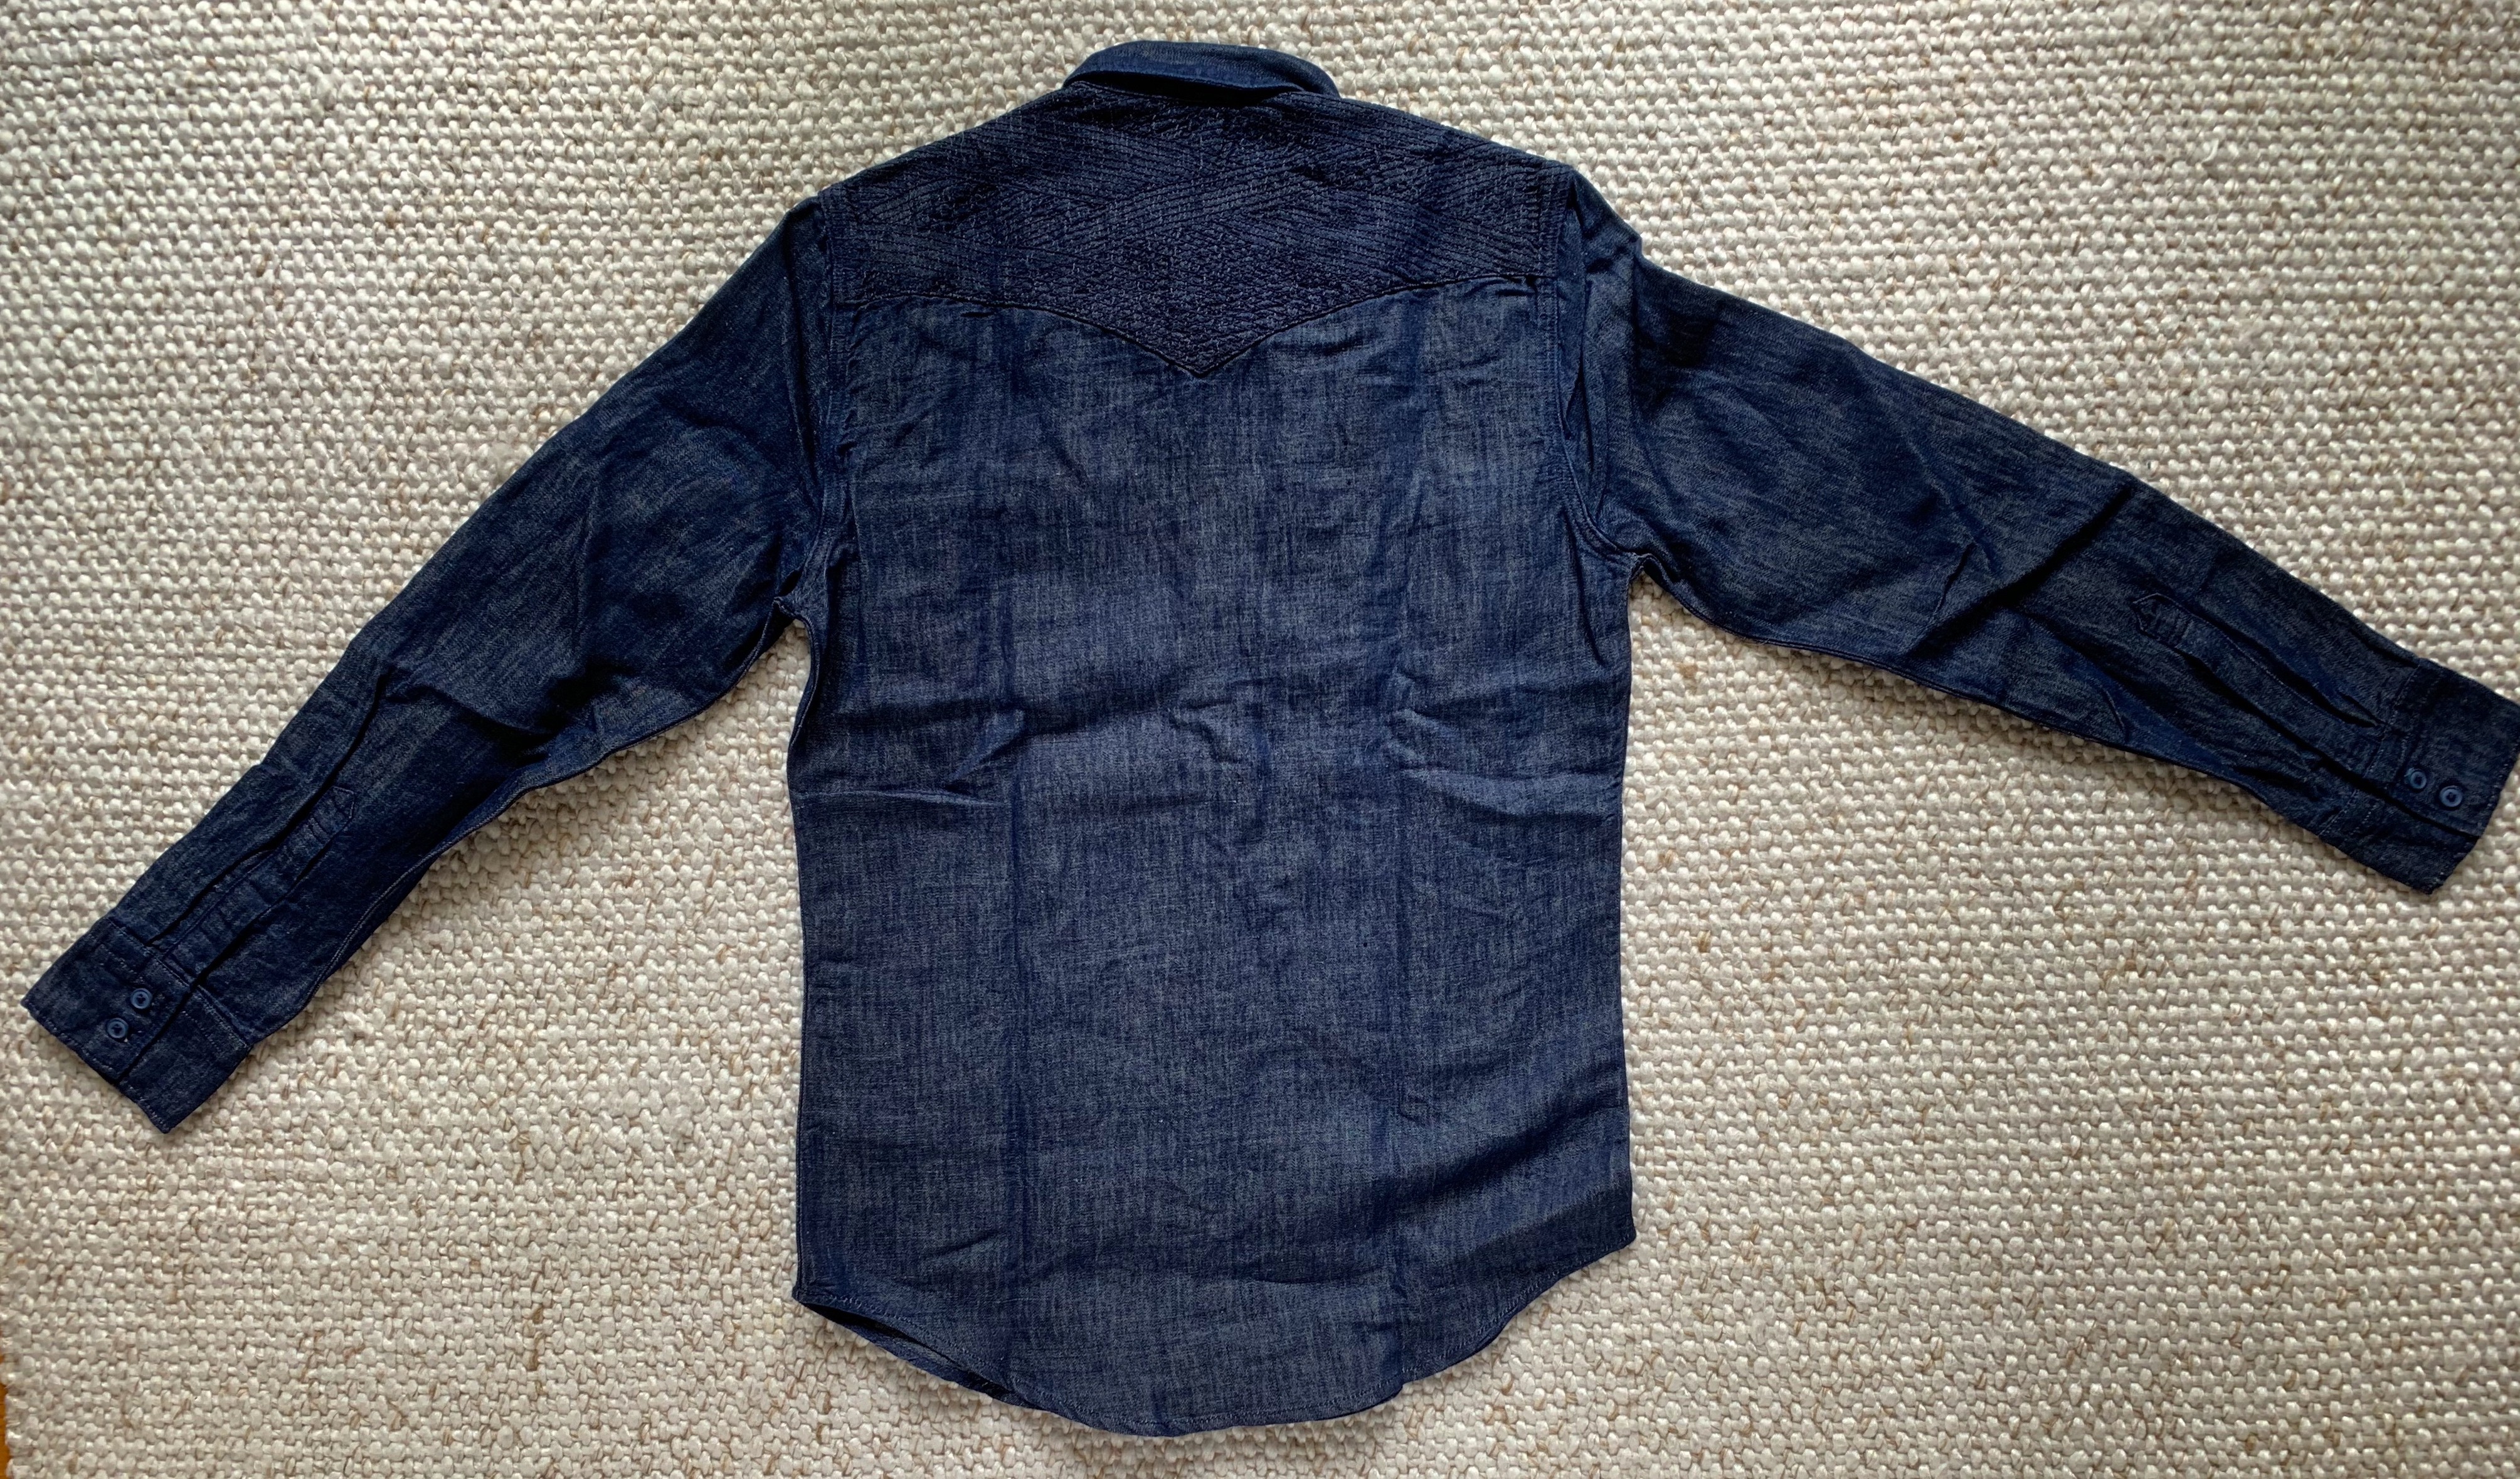 Outerknown - NWT $128 - Outerknown X Levi's Western w/ Stitched Yoke - 5